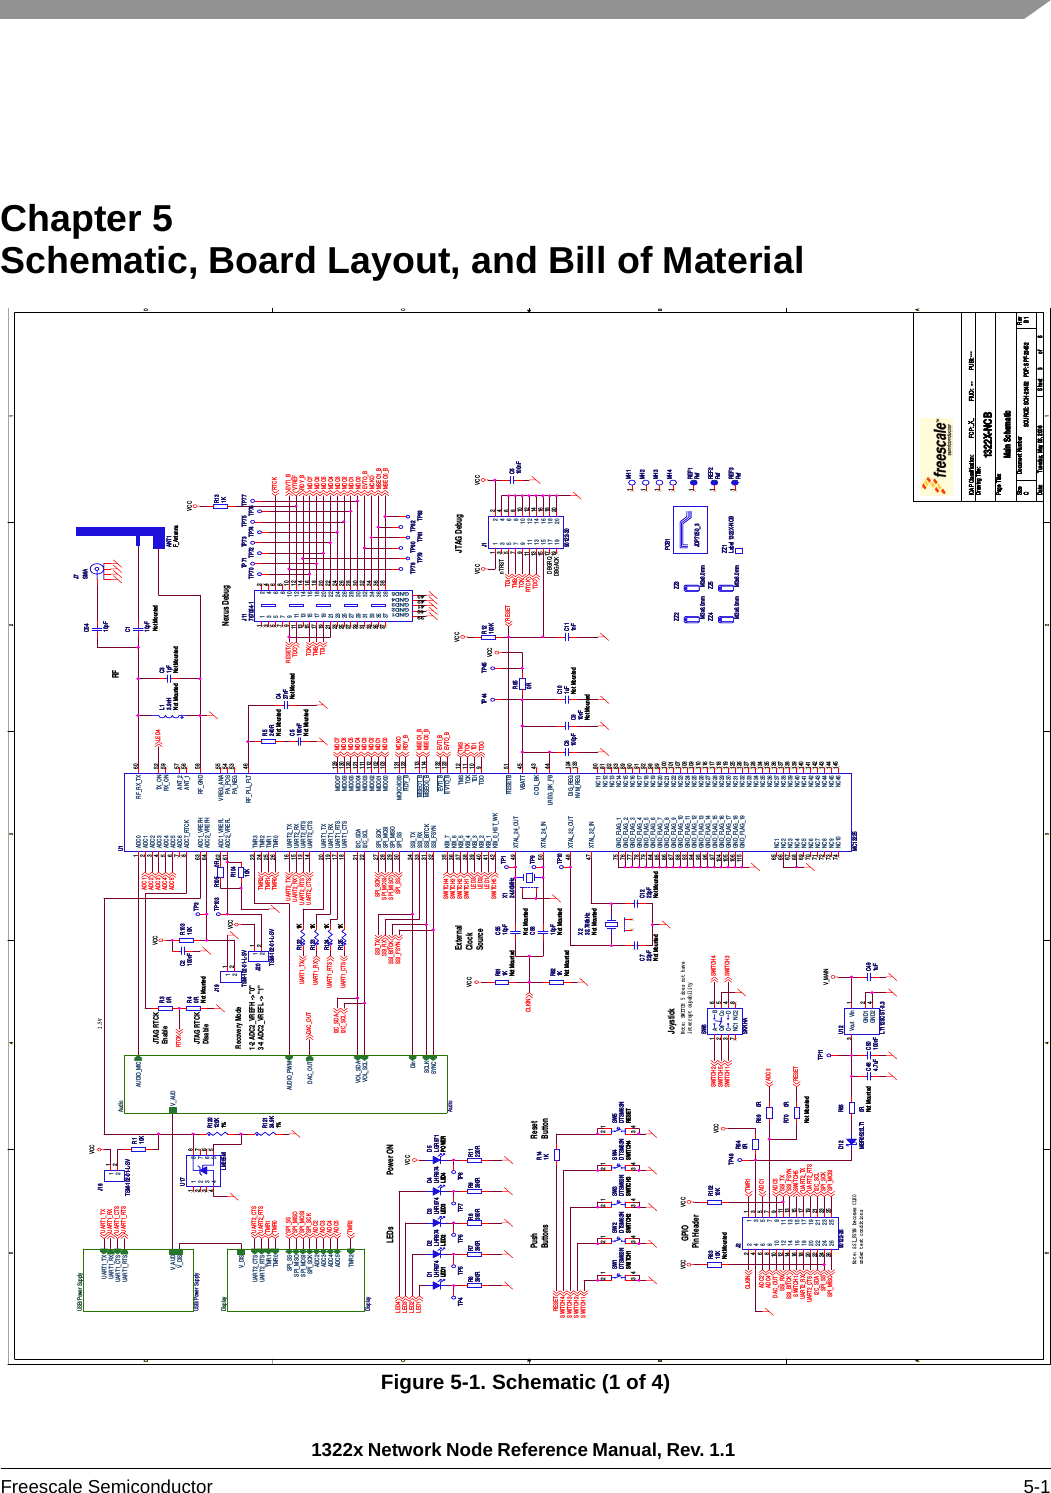 1322x Network Node Reference Manual, Rev. 1.1 Freescale Semiconductor 5-1Chapter 5  Schematic, Board Layout, and Bill of MaterialFigure 5-1. Schematic (1 of 4)5544332211D DC CB BA AVCCVCCVCCVCC VCCVCCV_MAINVCCVCCVCCVCCVCCVCCVCCLED1LED2LED3LED4SWITCH4SWITCH3SWITCH2SWITCH1LED1LED2LED4LED3SWITCH4SWITCH3SWITCH2SWITCH1SWITCH5UART1_CTSUART1_TXUART1_RXUART1_RTSUART1_TXUART1_CTSUART1_RXUART1_RTSRESETRESETRTCKRTCKSWITCH1SWITCH2SWITCH3SWITCH4SWITCH5UART2_TXUART2_RTSUART2_RXUART2_CTSSPI_SCKSPI_SCKSPI_MOSISPI_SSSPI_MISOI2C_SCLADC1ADC2ADC3ADC4ADC5ADC2ADC3ADC4ADC5UART2_TXUART2_RXUART2_CTSUART2_RTSI2C_SDAI2C_SCLI2C_SDASPI_MOSISPI_SSSPI_MISOTMR1TMR1ADC1SSI_TXSSI_BITCKSSI_FSYNSSI_RXSSI_TXSSI_BITCK SSI_FSYNSSI_RXSWITCH1 SWITCH5DAC_OUTDAC_OUTTDOTDITCKTMSTDITDOTCKTMSRESETTDOTCKTMSTDIRTCKMDO0MDO1MDO2MDO3MDO4MDO5MDO6MDO7MDO0MDO1MDO2MDO3MDO4MDO5MDO6MDO7MCKORDY_BMSEO1_BMSEO0_BEVTI_BEVTO_BEVTI_BRDY_BEVTO_BMCKOMSEO1_BMSEO0_BVTREFCLKINCLKINUART2_CTSUART2_RTSTMR1TMR0SPI_SSSPI_MISOSPI_MOSISPI_SCKADC2ADC3ADC4ADC5TMR2TMR2TMR0RESETDrawing Title:Size Document Number RevDate: Sheet ofPage Title:ICAP Classification: FCP: FIUO: PUBI:SOURCE: SCH-23452   PDF: SPF-23452 B11322X-NCBCTuesday, May 06, 2008Main Schematic36_X_ ------Drawing Title:Size Document Number RevDate: Sheet ofPage Title:ICAP Classification: FCP: FIUO: PUBI:SOURCE: SCH-23452   PDF: SPF-23452 B11322X-NCBCTuesday, May 06, 2008Main Schematic36_X_ ------Drawing Title:Size Document Number RevDate: Sheet ofPage Title:ICAP Classification: FCP: FIUO: PUBI:SOURCE: SCH-23452   PDF: SPF-23452 B11322X-NCBCTuesday, May 06, 2008Main Schematic36_X_ ------    GPIOPin HeaderPushButtonsLEDsRFJTAG DebugDBGRQDBGACKnTRSTJTAG RTCKEnableResetButtonPower ONJoystickJTAG RTCKDisableNexus DebugNote: SWITCH 5 does not haveinterrupt capabilityNote: SSI_FSYN becomes CLKOunder test conditionsExternalClockSource1-2 ADC2_VREFH -&gt; &quot;0&quot;3-4 ADC2_VREFL -&gt; &quot;1&quot;Recovery Mode1.5VC8100pFC8100pFR141KR141KX232.768kHzNot MountedX232.768kHzNot MountedR8310KNot MountedR8310KNot MountedTP103TP103R11220RR11220RR110KR110KJ190122-20J190122-201133557799111113131515171719192244668810 1012 1214 1416 1618 1820 20SW5DTSM63NRESETSW5DTSM63NRESET3124TP10TP10DisplayDisplayTMR1TMR0SPI_SSSPI_MISOSPI_MOSIADC2ADC3ADC4ADC5TMR2SPI_SCKV_DISUART2_RTSUART2_CTSR131KR131KZZ4M3x8.0mmZZ4M3x8.0mmD3LHR974LED3D3LHR974LED3R6390RR6390RTP83TP83REF3RefREF3Ref11USB/Power SupplyUSB/Power SupplyUART1_CTSUART1_TXUART1_RTSUART1_RXV_AUDV_DISTP78TP78R10410KR10410KC111nFC111nFTP76TP76R70 0RNot MountedR70 0RNot MountedMH2MH21R640RR640RR5240RNot MountedR5240RNot MountedTP70TP70ZZ3M3x8.0mmZZ3M3x8.0mmTP6TP6TP71TP71R122 1KR122 1KC427nFNot MountedC427nFNot MountedTP45TP45C491uFC491uFC484.7uFC484.7uFR30RR30RR10210KR10210KSW2DTSM63NSWITCH2SW2DTSM63NSWITCH23124TP8TP8TP72TP72C5510pFNot MountedC5510pFNot MountedX124.00MHzX124.00MHzC31pFNot MountedC31pFNot MountedTP80TP80MH3MH31TP73TP73ZZ1Label 1322X-NCBZZ1Label 1322X-NCBR69 0RR69 0RD12MBR0520LT1D12MBR0520LT1L13.9nHNot MountedL13.9nHNot MountedTP1TP1R9390RR9390RC5810pFNot MountedC5810pFNot MountedR811KNot MountedR811KNot MountedR105 0RR105 0RR123 1KR123 1KC1222pFNot MountedC1222pFNot MountedTP74TP74R40RNot MountedR40RNot MountedREF2RefREF2Ref11ZZ5M3x8.0mmZZ5M3x8.0mmU1MC13225U1MC13225UART2_RTS13EVTI_B 132MCKO/IO50 131MSEO0_B 114EVTO_B 123RDY_B 122MSEO1_B 113VBATT 45LREG_BK_FB 44COIL_BK 43ADC2_VREFL61 ADC1_VREFL62ADC1_VREFH63ADC2_VREFH64ADC01ADC12ADC23ADC34ADC45ADC56ADC67ADC7_RTCK8MDO00 103MDO01 102MDO02 112MDO03 111MDO04 121MDO05 120MDO06 130MDO07 129TDI 10RF_GND 58TDO 9UART2_CTS14UART2_RX15TCK 11TMS 12RESETB 51VREG_ANA 55XTAL_24_OUT49RF_PLL_FLT 46XTAL_24_IN50KBI_0_HST_WK42XTAL_32_IN47ANT_1 56XTAL_32_OUT48RF_RX_TX 60ANT_2 57UART2_TX16RX_ON 59PA_POS 54PA_NEG 53TX_ON 52UART1_RTS17UART1_CTS18UART1_RX19 UART1_TX20I2C_SDA21I2C_SCL22TMR323TMR224TMR125TMR026SPI_SCK27SPI_MOSI28SPI_MISO29SPI_SS30SSI_BITCK31SSI_FSYN32SSI_RX33 SSI_TX34KBI_141 KBI_240 KBI_339 KBI_438 KBI_537 KBI_636 KBI_735GND_FLAG_175DIG_REG 124NVM_REG 133GND_FLAG_276GND_FLAG_377GND_FLAG_478GND_FLAG_579GND_FLAG_684GND_FLAG_785GND_FLAG_886GND_FLAG_987GND_FLAG_1088GND_FLAG_1193GND_FLAG_1294GND_FLAG_1395GND_FLAG_1496GND_FLAG_1597GND_FLAG_16104GND_FLAG_17105GND_FLAG_18106GND_FLAG_19115NC165NC266NC367NC468NC569NC670NC771NC872NC973NC1074NC11 80NC12 81NC13 82NC14 83NC15 89NC16 90NC17 91NC18 92NC19 98NC20 99NC21 100NC22 101NC23 107NC24 108NC25 109NC26 110NC27 116NC28 117NC29 118NC30 119NC31 125NC32 126NC33 127NC34 128NC35 134NC36 135NC37 136NC38 137NC39 138NC40 139NC41 140NC42 141NC43 142NC44 143NC45 144NC46 145TP46TP46R10310KR10310KAudioAudioSCLKAUDIO_PWMDinAUDIO_MICSYNCDAC_OUTV_AUDVOL_SCLVOL_SDASW6SKRHASW6SKRHAC3A1Ce2D4Co 5B6NC17NC2 8J19TSM-102-01-L-SVJ19TSM-102-01-L-SV1122PCB1JDP7050_3PCB1JDP7050_3TP82TP82TP9TP9TP75TP75J20TSM-102-01-L-SVJ20TSM-102-01-L-SV1122ANT1F_AntennaANT1F_AntennaR12100KR12100KD4LHR974LED4D4LHR974LED4SW4DTSM63NSWITCH4SW4DTSM63NSWITCH43124ZZ2M3x8.0mmZZ2M3x8.0mmJ290122-26J290122-26113355779911 1113 1315 1517 1719 1921 2123 2325 2522446688101012121414161618182020222224242626TP5TP5R660RNot MountedR660RNot MountedR8390RR8390RC110pFNot MountedC110pFNot MountedC6100nFC6100nFD2LHR974LED2D2LHR974LED2J11767054-1J11767054-11133557799111113131515171719192121232325252727292931313333353537372244668810 1012 1214 1416 1618 1820 2022 2224 2426 2628 2830 3032 3234 3436 3638 38GND139GND240GND341GND442GND543R124 1KR124 1KC910nFNot MountedC910nFNot MountedC5180nFNot MountedC5180nFNot MountedR650RR650RD5LGR971POWERD5LGR971POWERC101uFNot MountedC101uFNot MountedR12124.9K1%R12124.9K1%C50100nFC50100nFTP79TP79TP4TP4SW1DTSM63NSWITCH1SW1DTSM63NSWITCH13124R120120K1%R120120K1%C2100nFC2100nFJ7SMAJ7SMAC722pFNot MountedC722pFNot MountedSW3DTSM63NSWITCH3SW3DTSM63NSWITCH33124REF1RefREF1Ref11R125 1KR125 1KTP7TP7U17LM285MU17LM285M1122334455667788J18TSM-102-01-L-SVJ18TSM-102-01-L-SV1122MH4MH41TP44TP44R821KNot MountedR821KNot MountedMH1MH11R7390RR7390RD1LHR974LED1D1LHR974LED1TP11TP11C5410pFC5410pFTP77TP77TP3TP3TP81TP81U12LT1129CST-3.3U12LT1129CST-3.3Vin 1Vout3GND1 2GND2 4